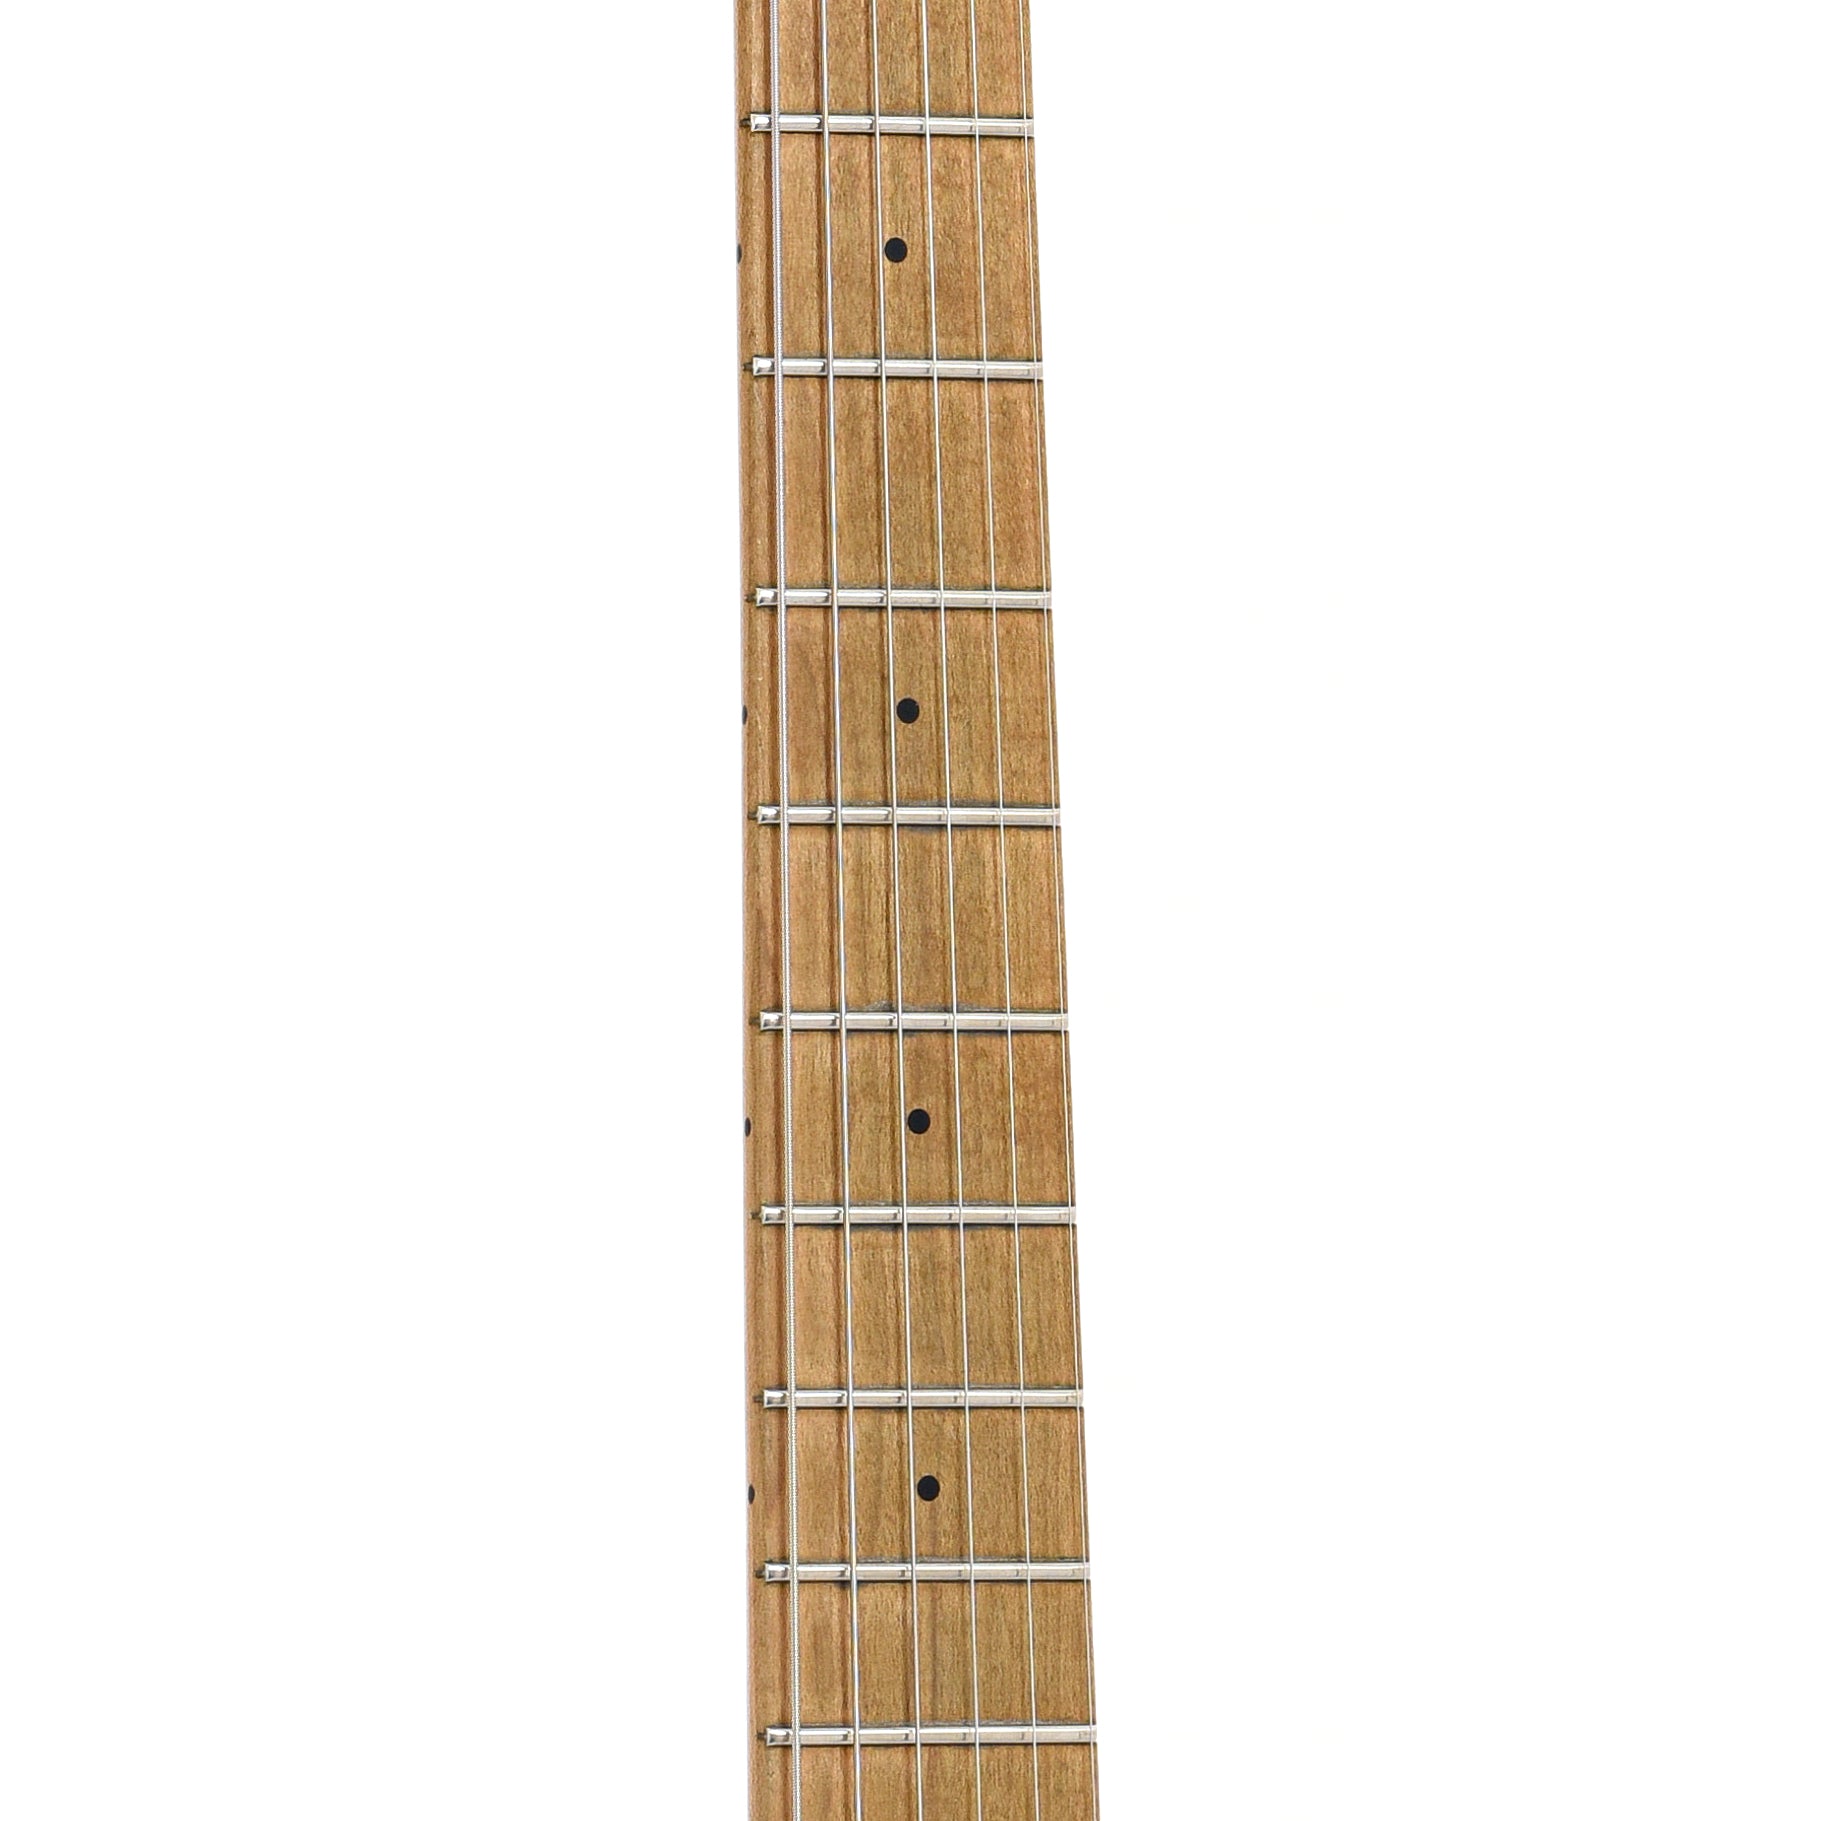 Fretboard of Ernie Ball Music Man Silhouette HSH Hardtail Electric Guitar (1999)